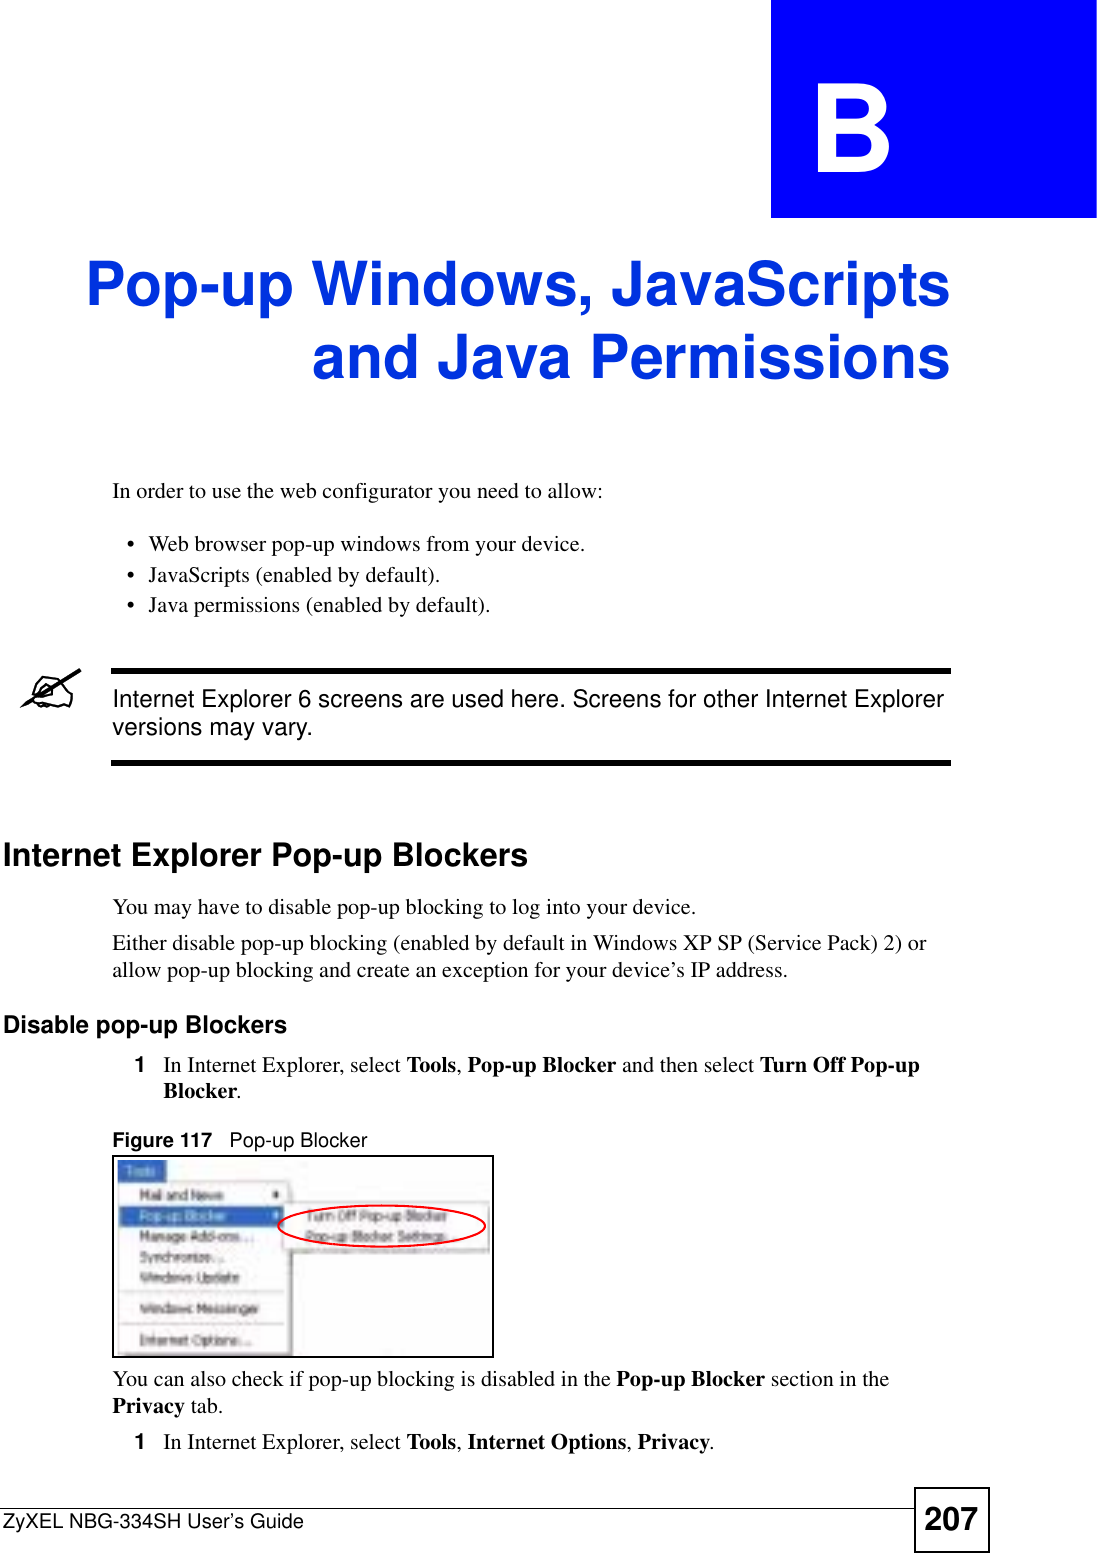 ZyXEL NBG-334SH User’s Guide 207APPENDIX  B Pop-up Windows, JavaScriptsand Java PermissionsIn order to use the web configurator you need to allow:• Web browser pop-up windows from your device.• JavaScripts (enabled by default).• Java permissions (enabled by default).&quot;Internet Explorer 6 screens are used here. Screens for other Internet Explorer versions may vary.Internet Explorer Pop-up BlockersYou may have to disable pop-up blocking to log into your device. Either disable pop-up blocking (enabled by default in Windows XP SP (Service Pack) 2) or allow pop-up blocking and create an exception for your device’s IP address.Disable pop-up Blockers1In Internet Explorer, select Tools,Pop-up Blocker and then select Turn Off Pop-up Blocker.Figure 117   Pop-up BlockerYou can also check if pop-up blocking is disabled in the Pop-up Blocker section in the Privacy tab. 1In Internet Explorer, select Tools,Internet Options,Privacy.